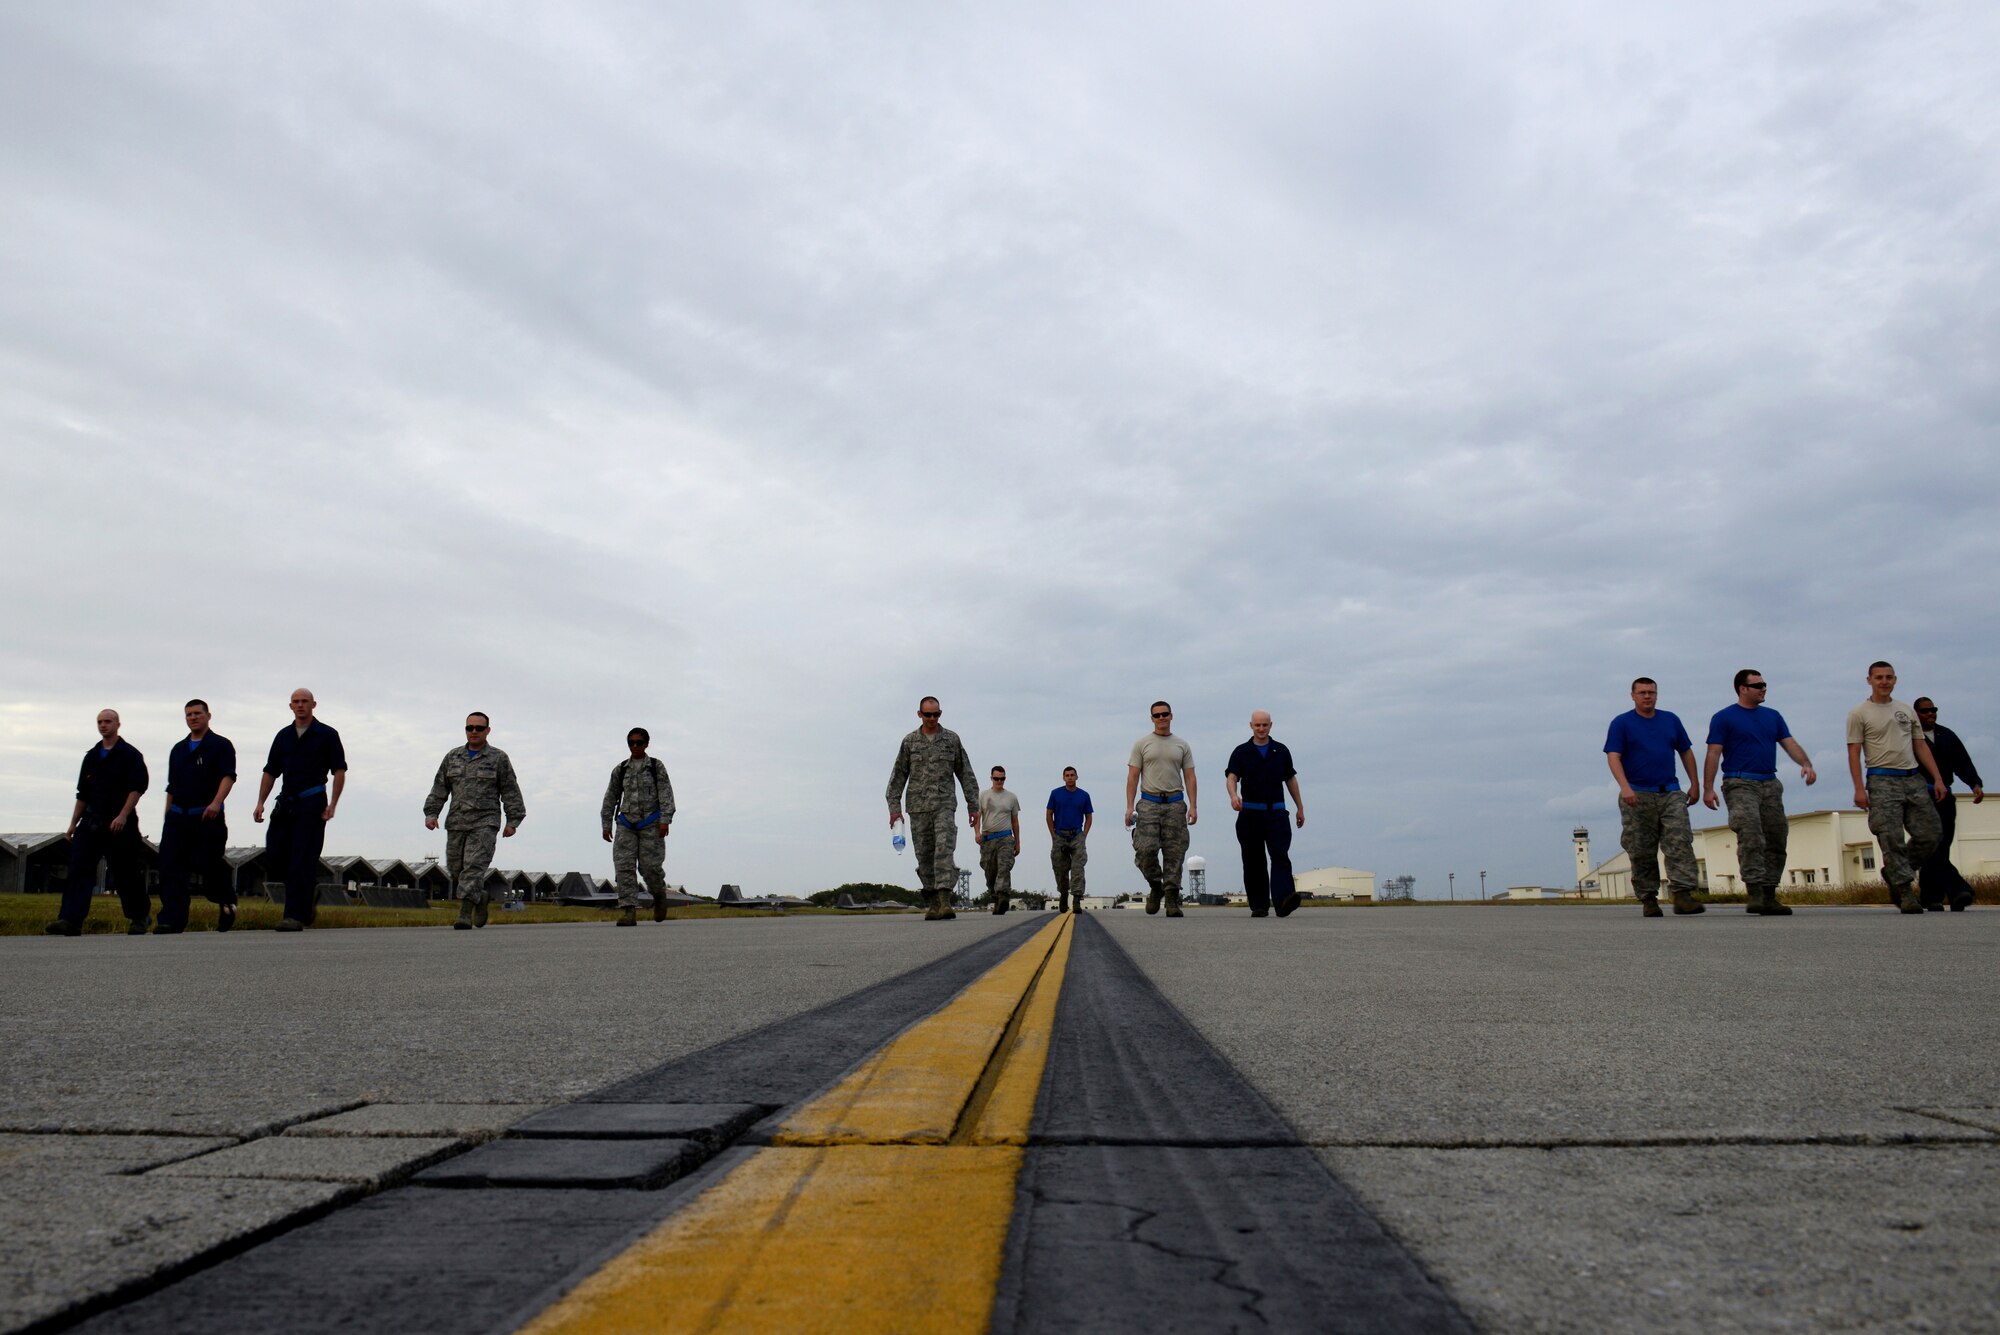 U.S. Air Force Airmen from the 525th Aircraft Maintenance Unit stationed at Joint Base Elmendorf-Richardson, Alaska, check the flight line for foreign object debris during Keen Sword 2015 on Kadena Air Base, Japan, Nov. 14, 2014. Keen Sword is a regularly scheduled exercise which strengthens Japan-U.S. military interoperability and meets mutual defense objectives. Japan-U.S. military operations and exercises increase readiness to respond to varied crisis situations in the region. (U.S. Air Force photo by Senior Airman Maeson L. Elleman/Released)